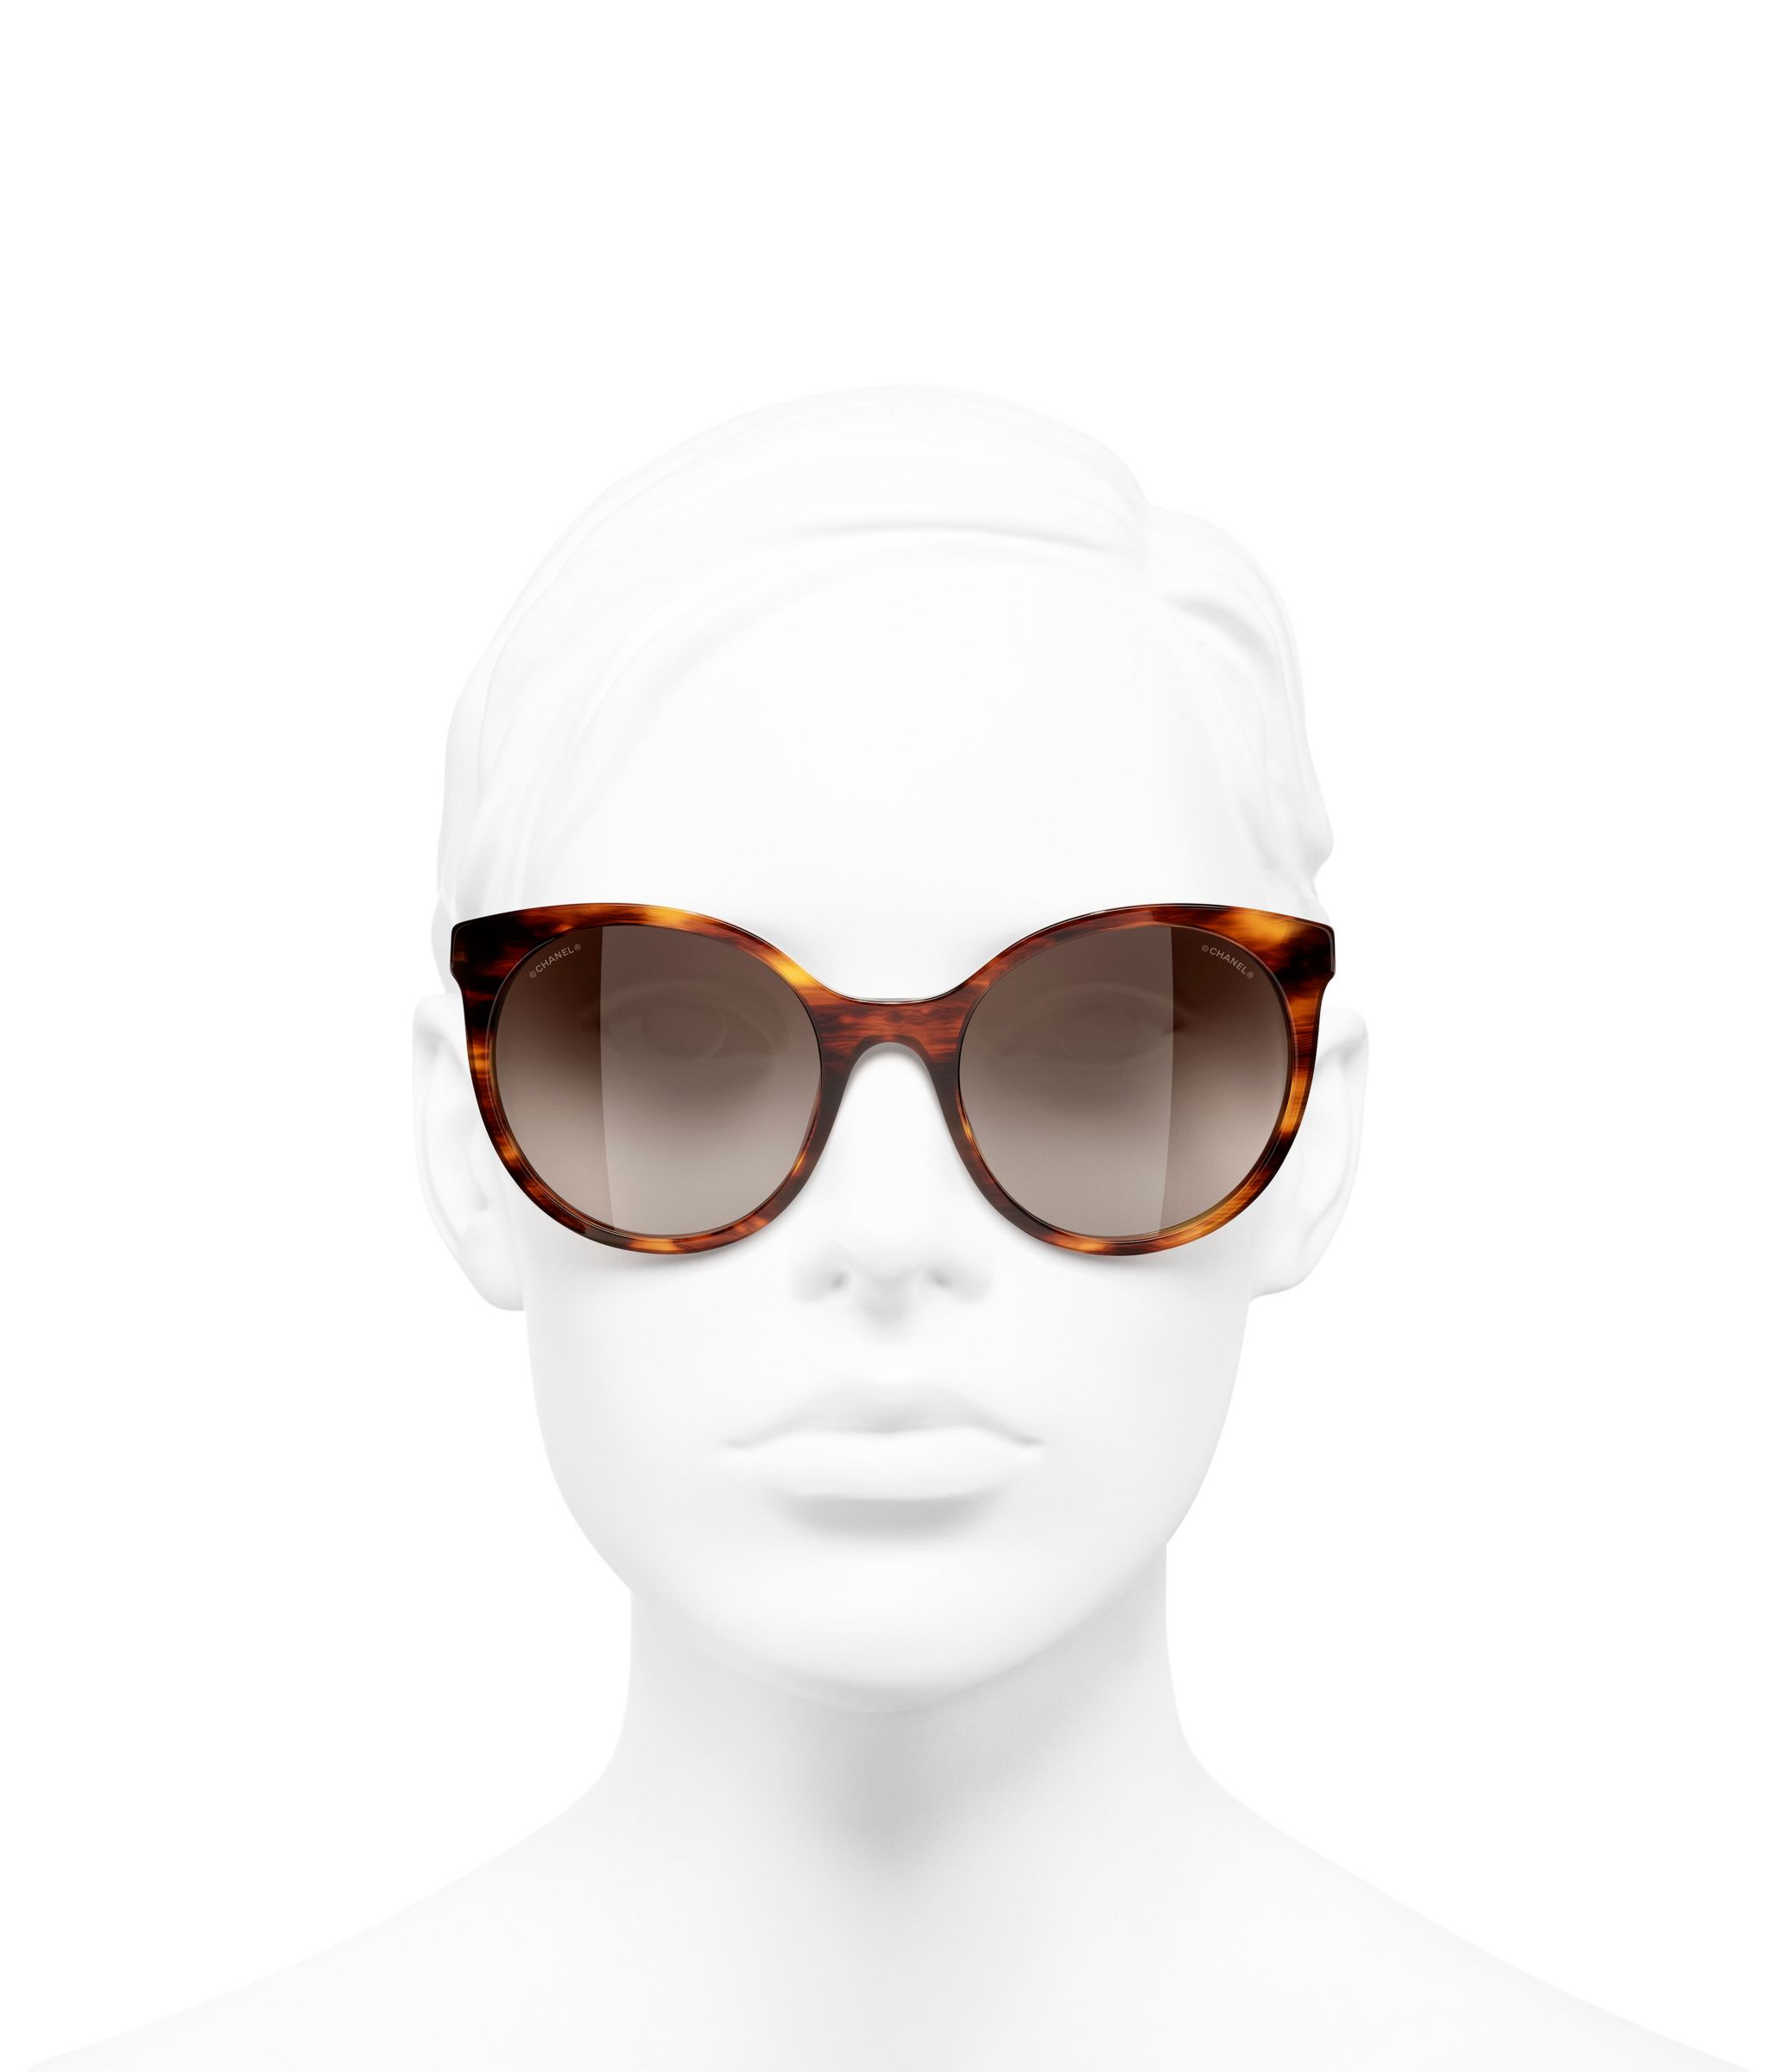 Buy CHANEL Oval Sunglasses CH5440 Striped Brown/Brown Gradient Online at johnlewis.com